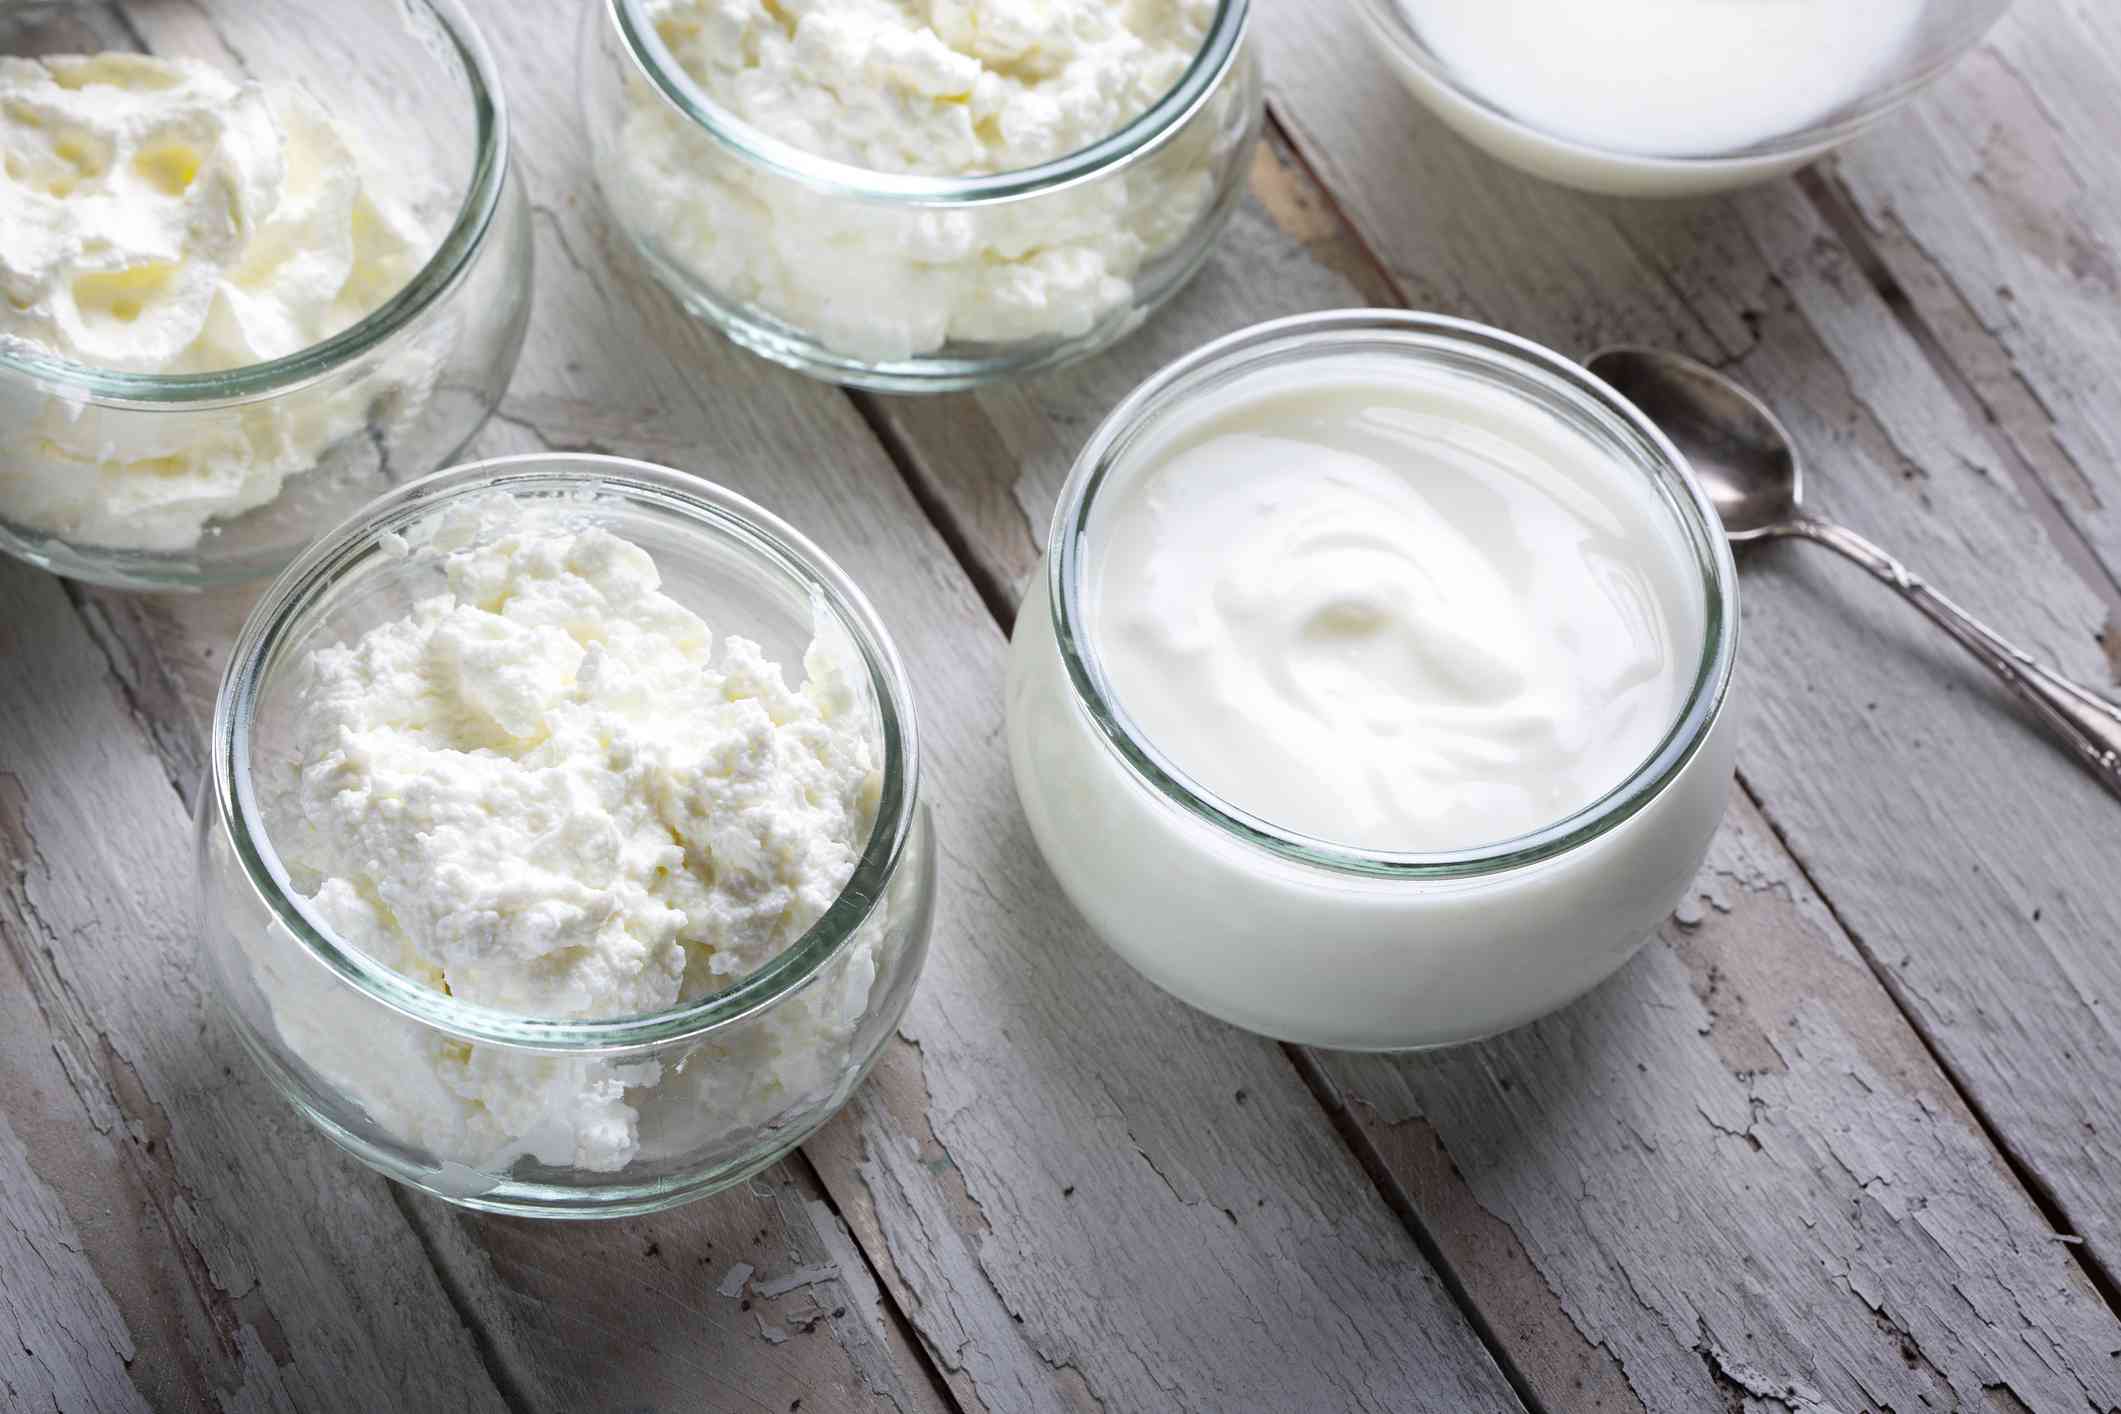 kefir vs. yogurt: which one is better for you?